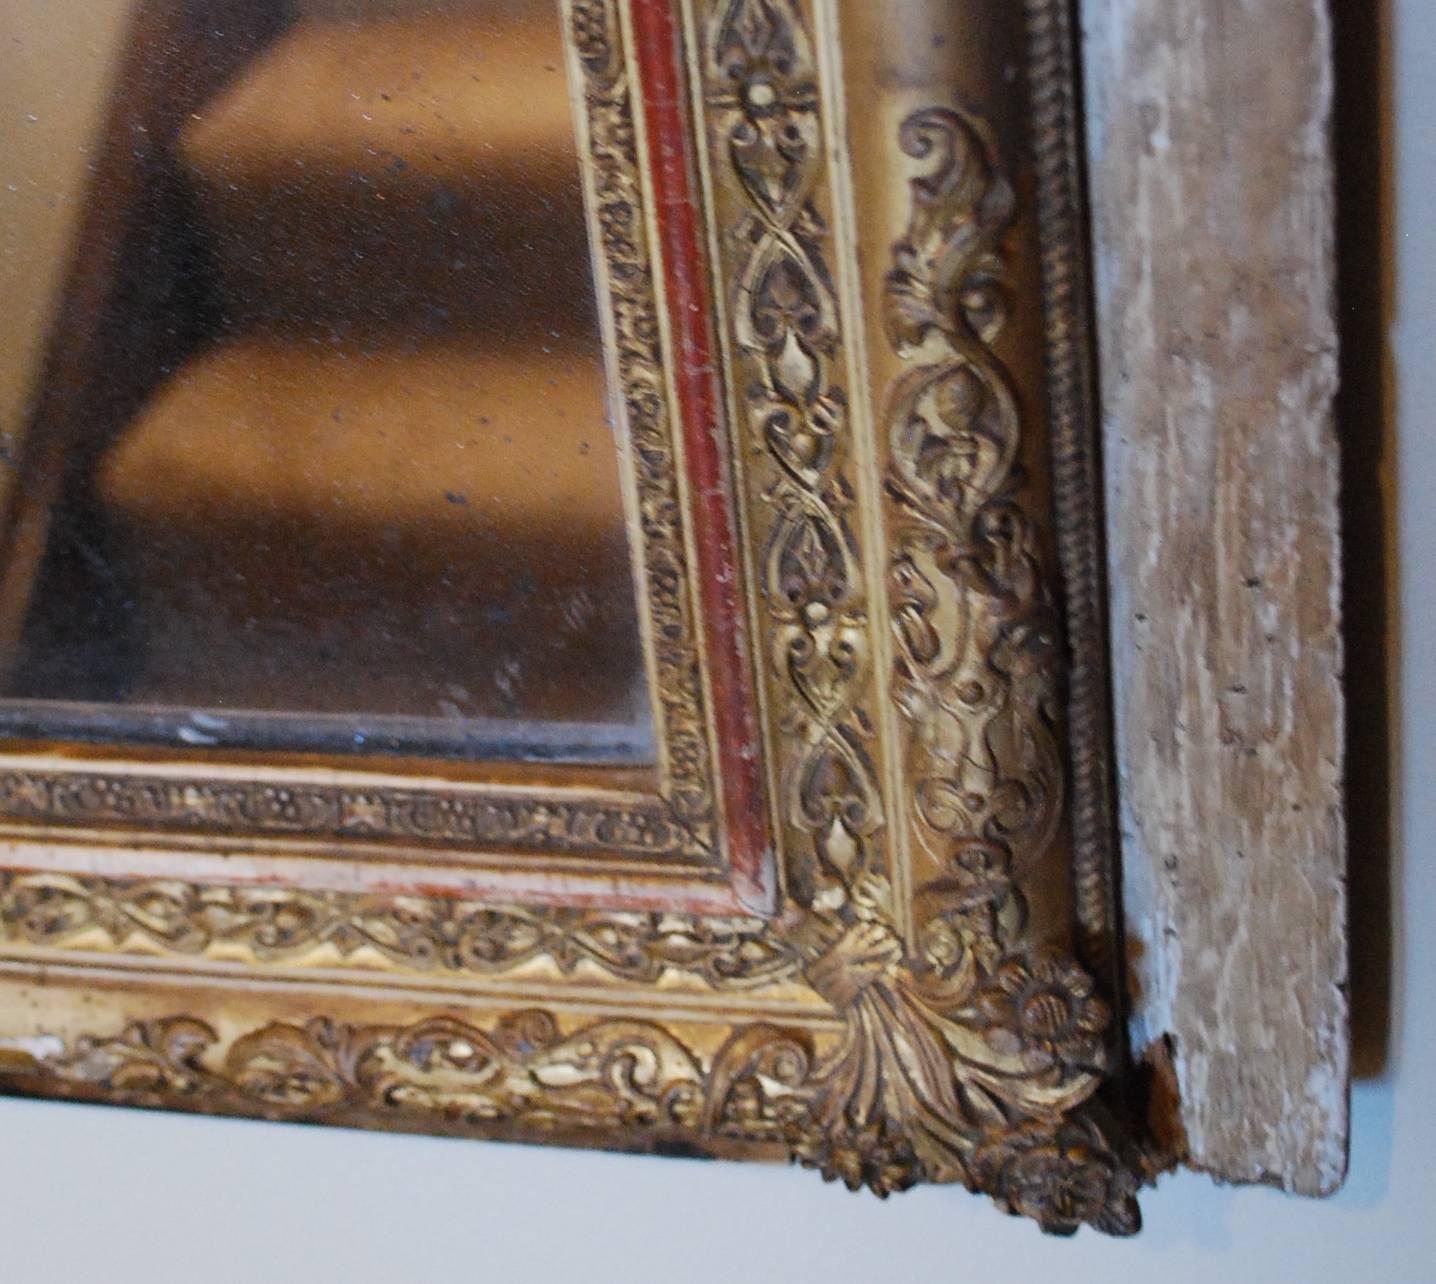 Trumeau painted mirror panel with original paint. Please see additional photos that show antiquing or silvering of mirror portion. Approximate dimensions of mirror portion: 28.5